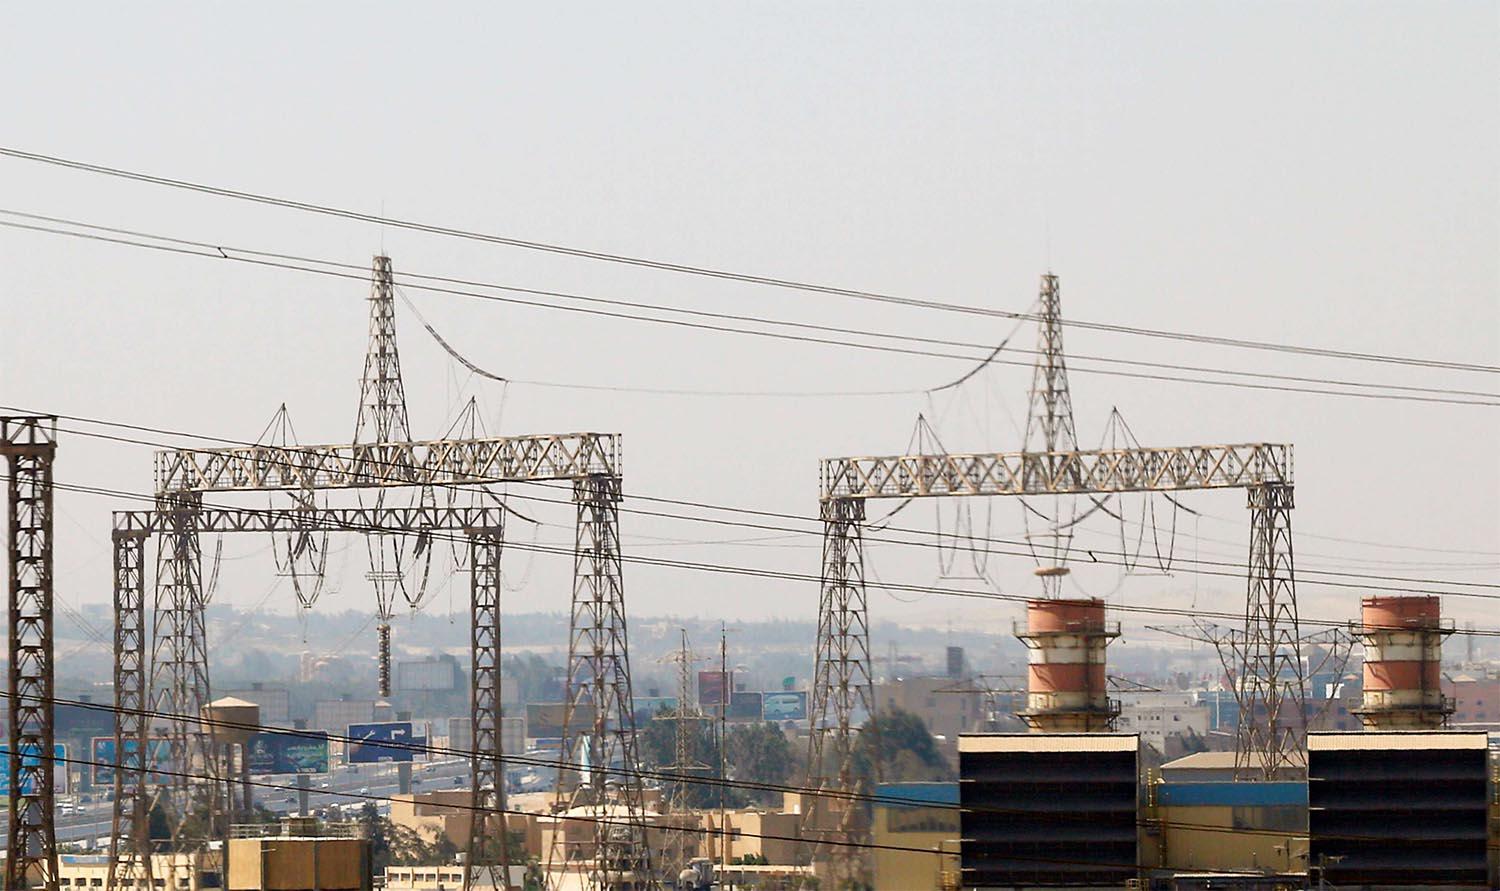 Electricity pylons and power transmission lines are seen in Cairo